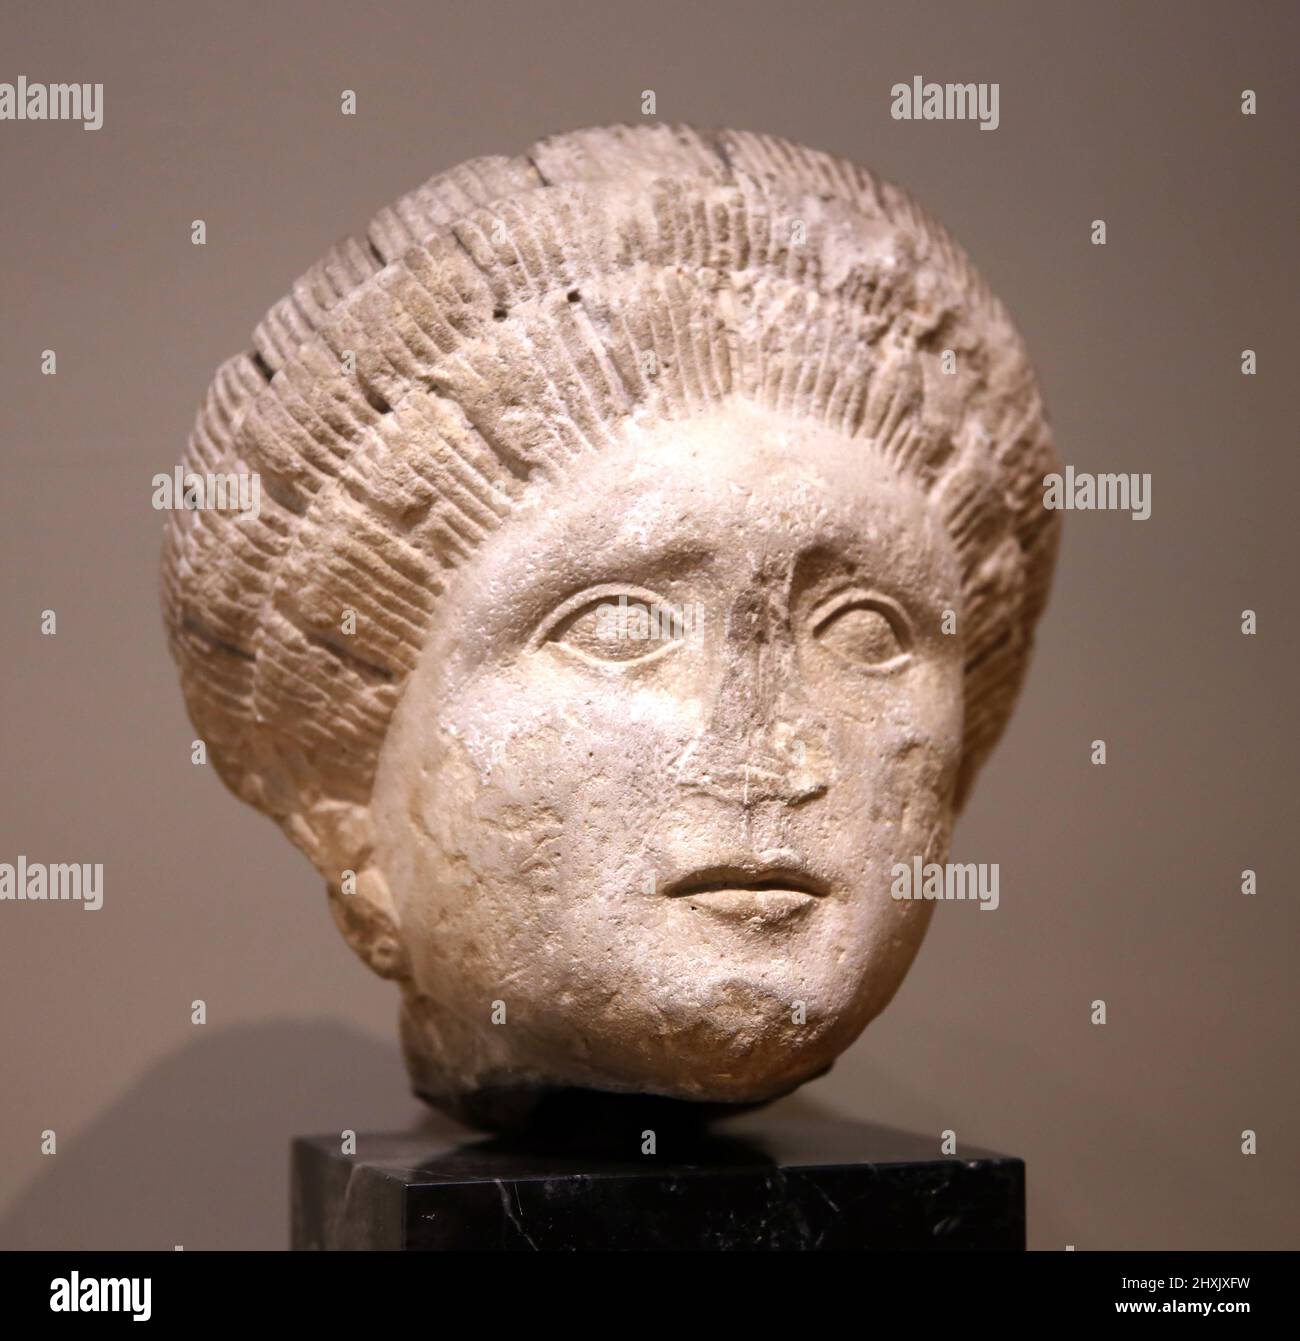 Female portrait. Hispanic workshop. Last of the 1st century or beginning of the 2nd century AD. Calcareous stone. Frederic Mares Museum. Barcelona, Sp Stock Photo